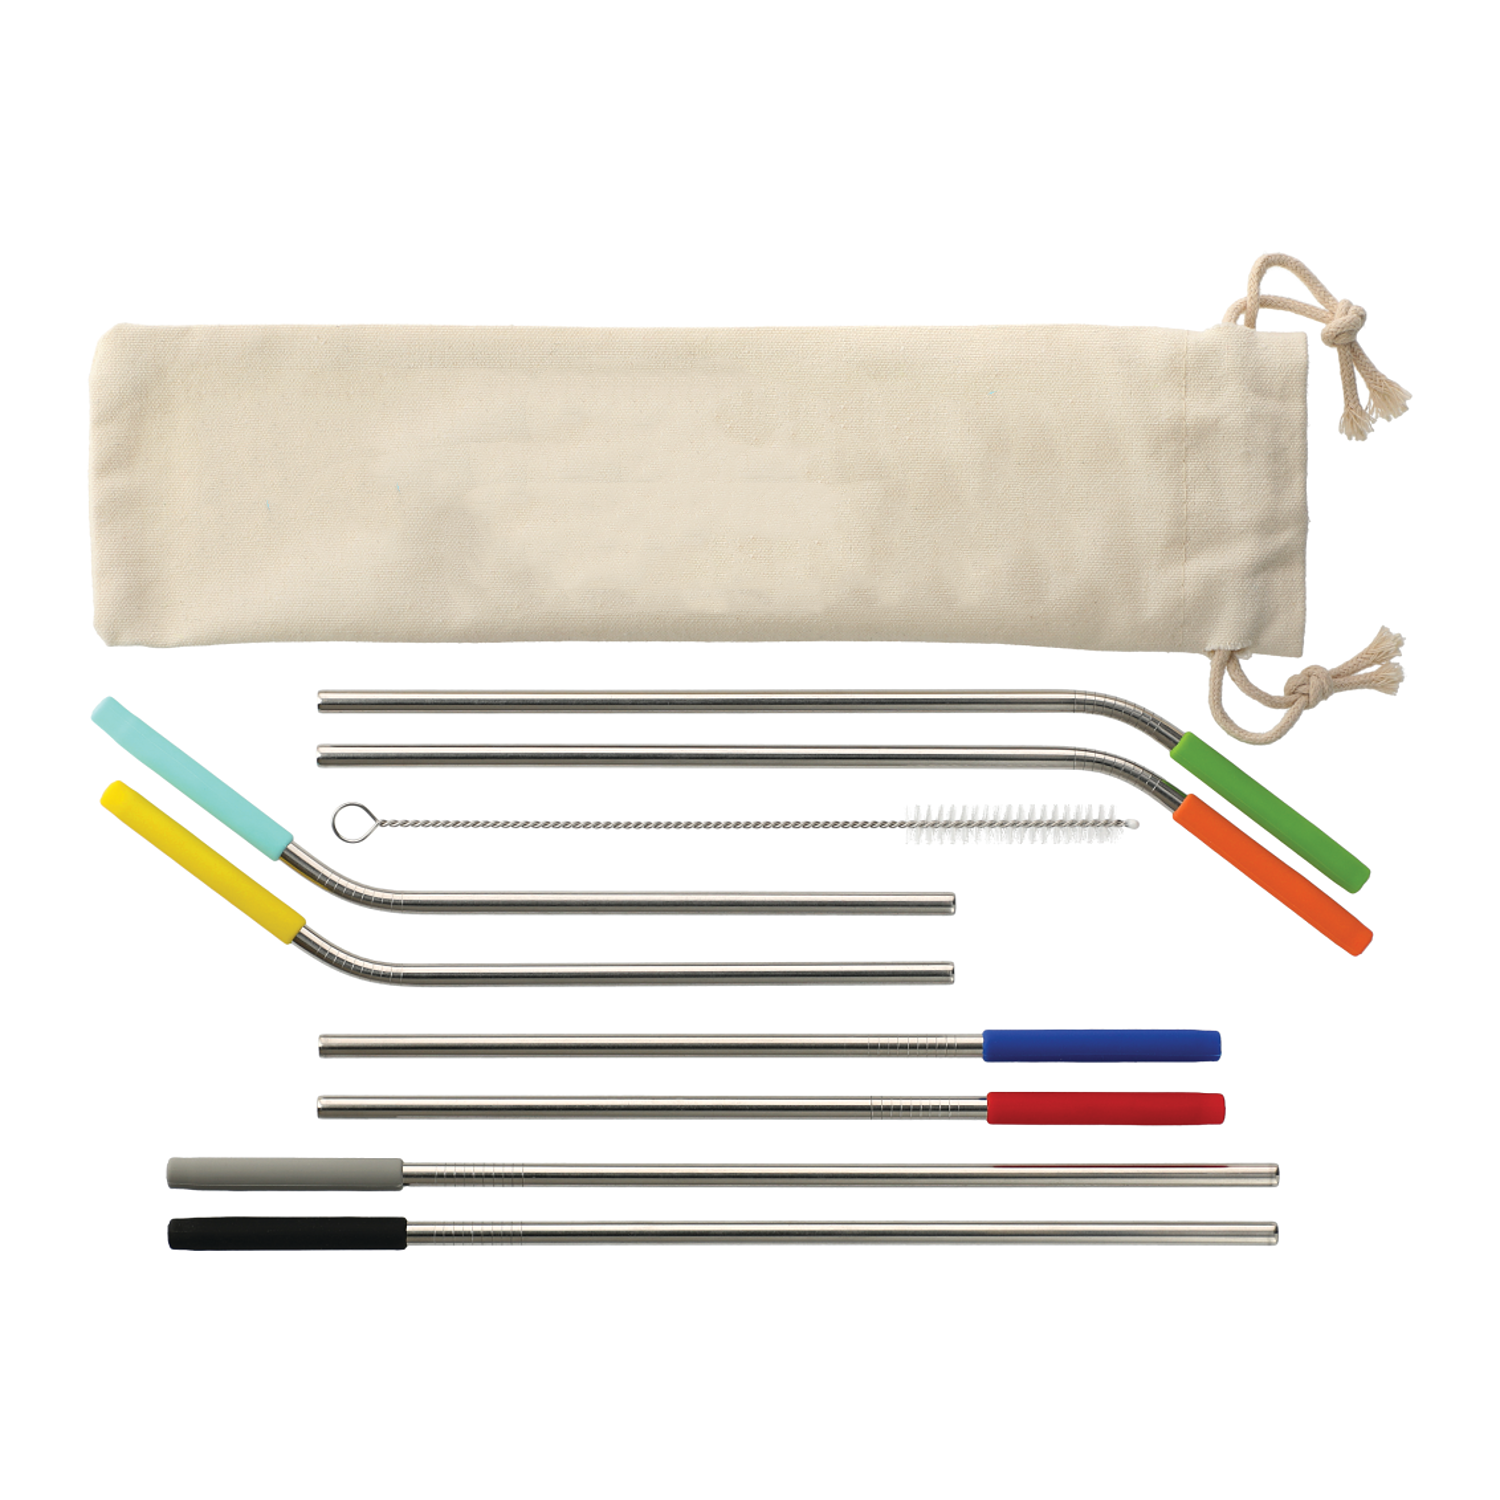 LEEDS 1628-39 - Reusable Stainless Straw 10 in 1 set